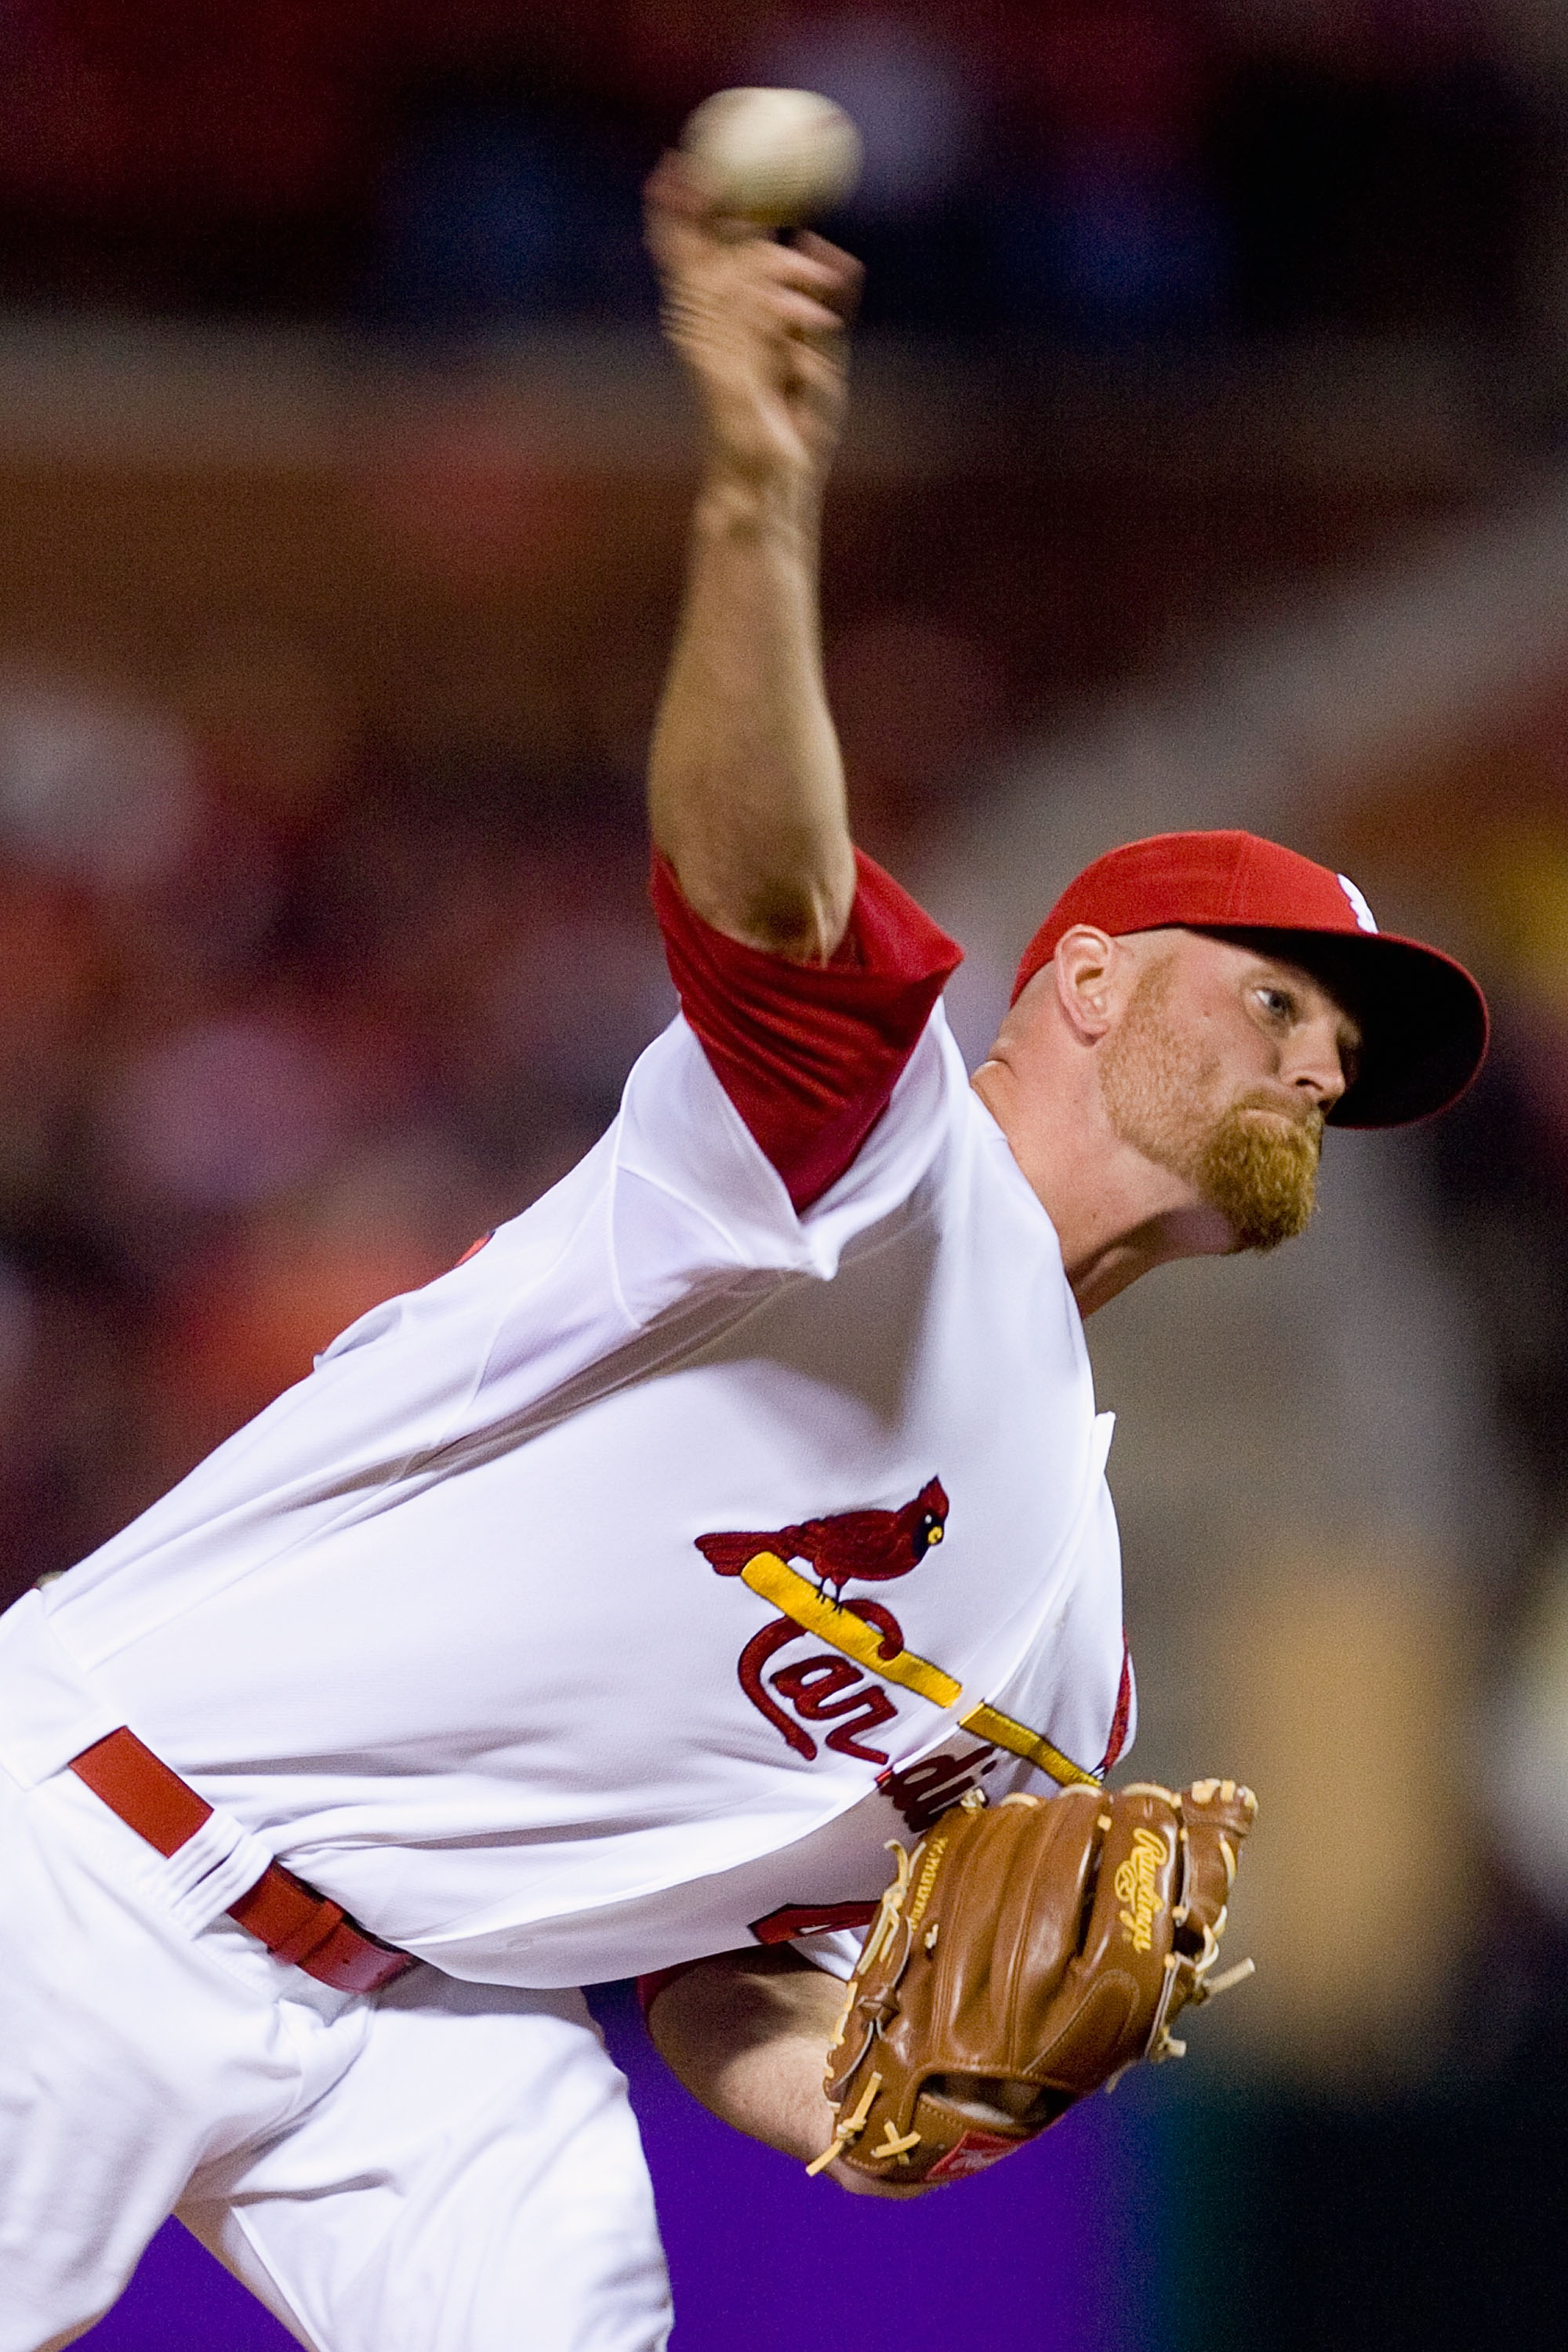 Cardinals agree to 1-year deal with pitcher Kyle McClellan